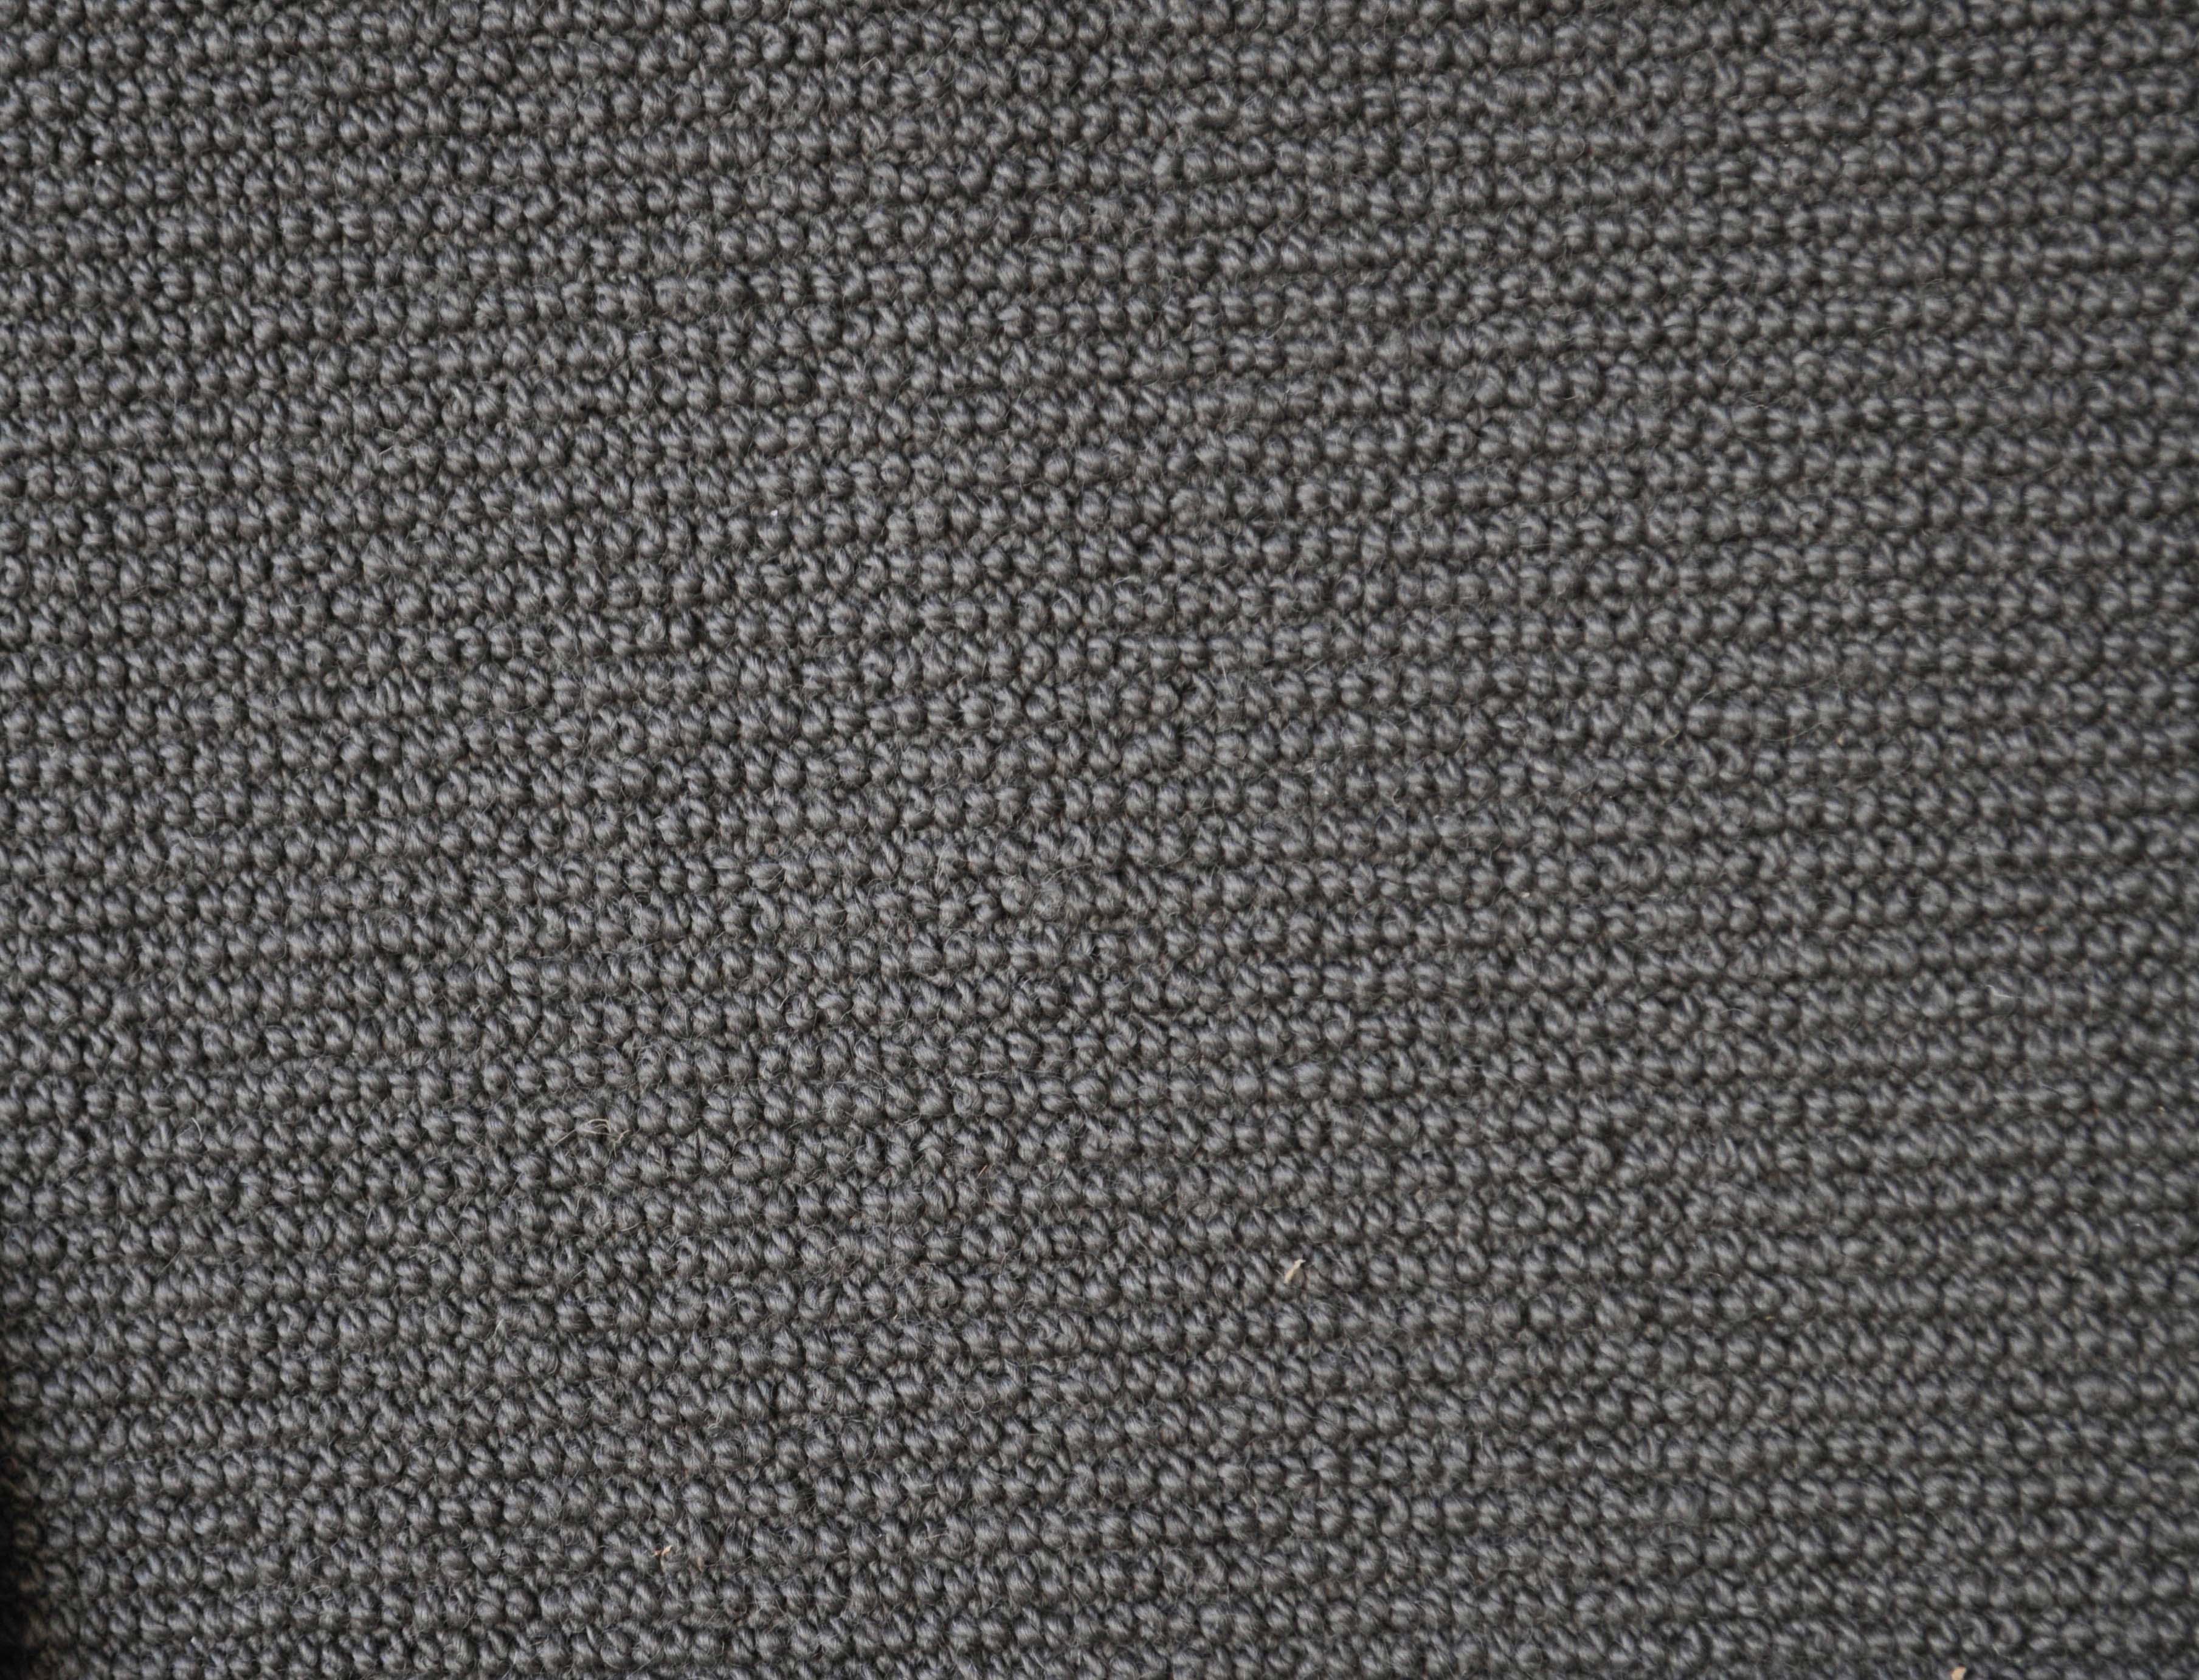  violet blue colored, 100% wool fibre, multi-level height pile, a sisal carpet called perfection on sale at Concord Floors.